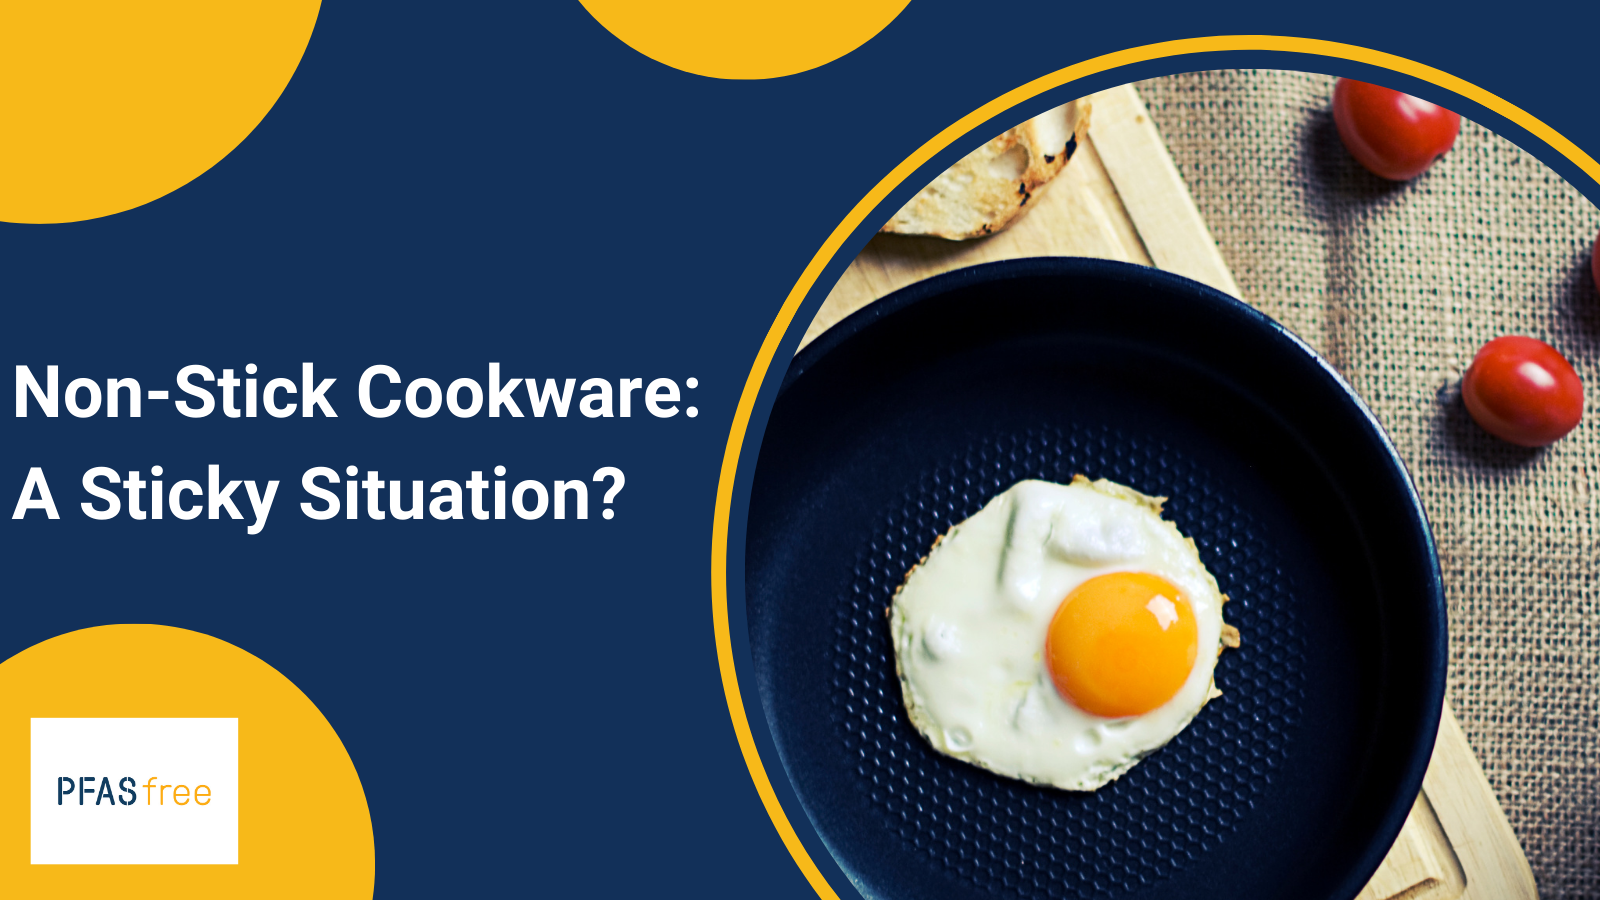 Is non-stick cookware safe and what are the alternatives? Non-stick cookware is a source of PFAS exposure for many and linked to multiple health risks.